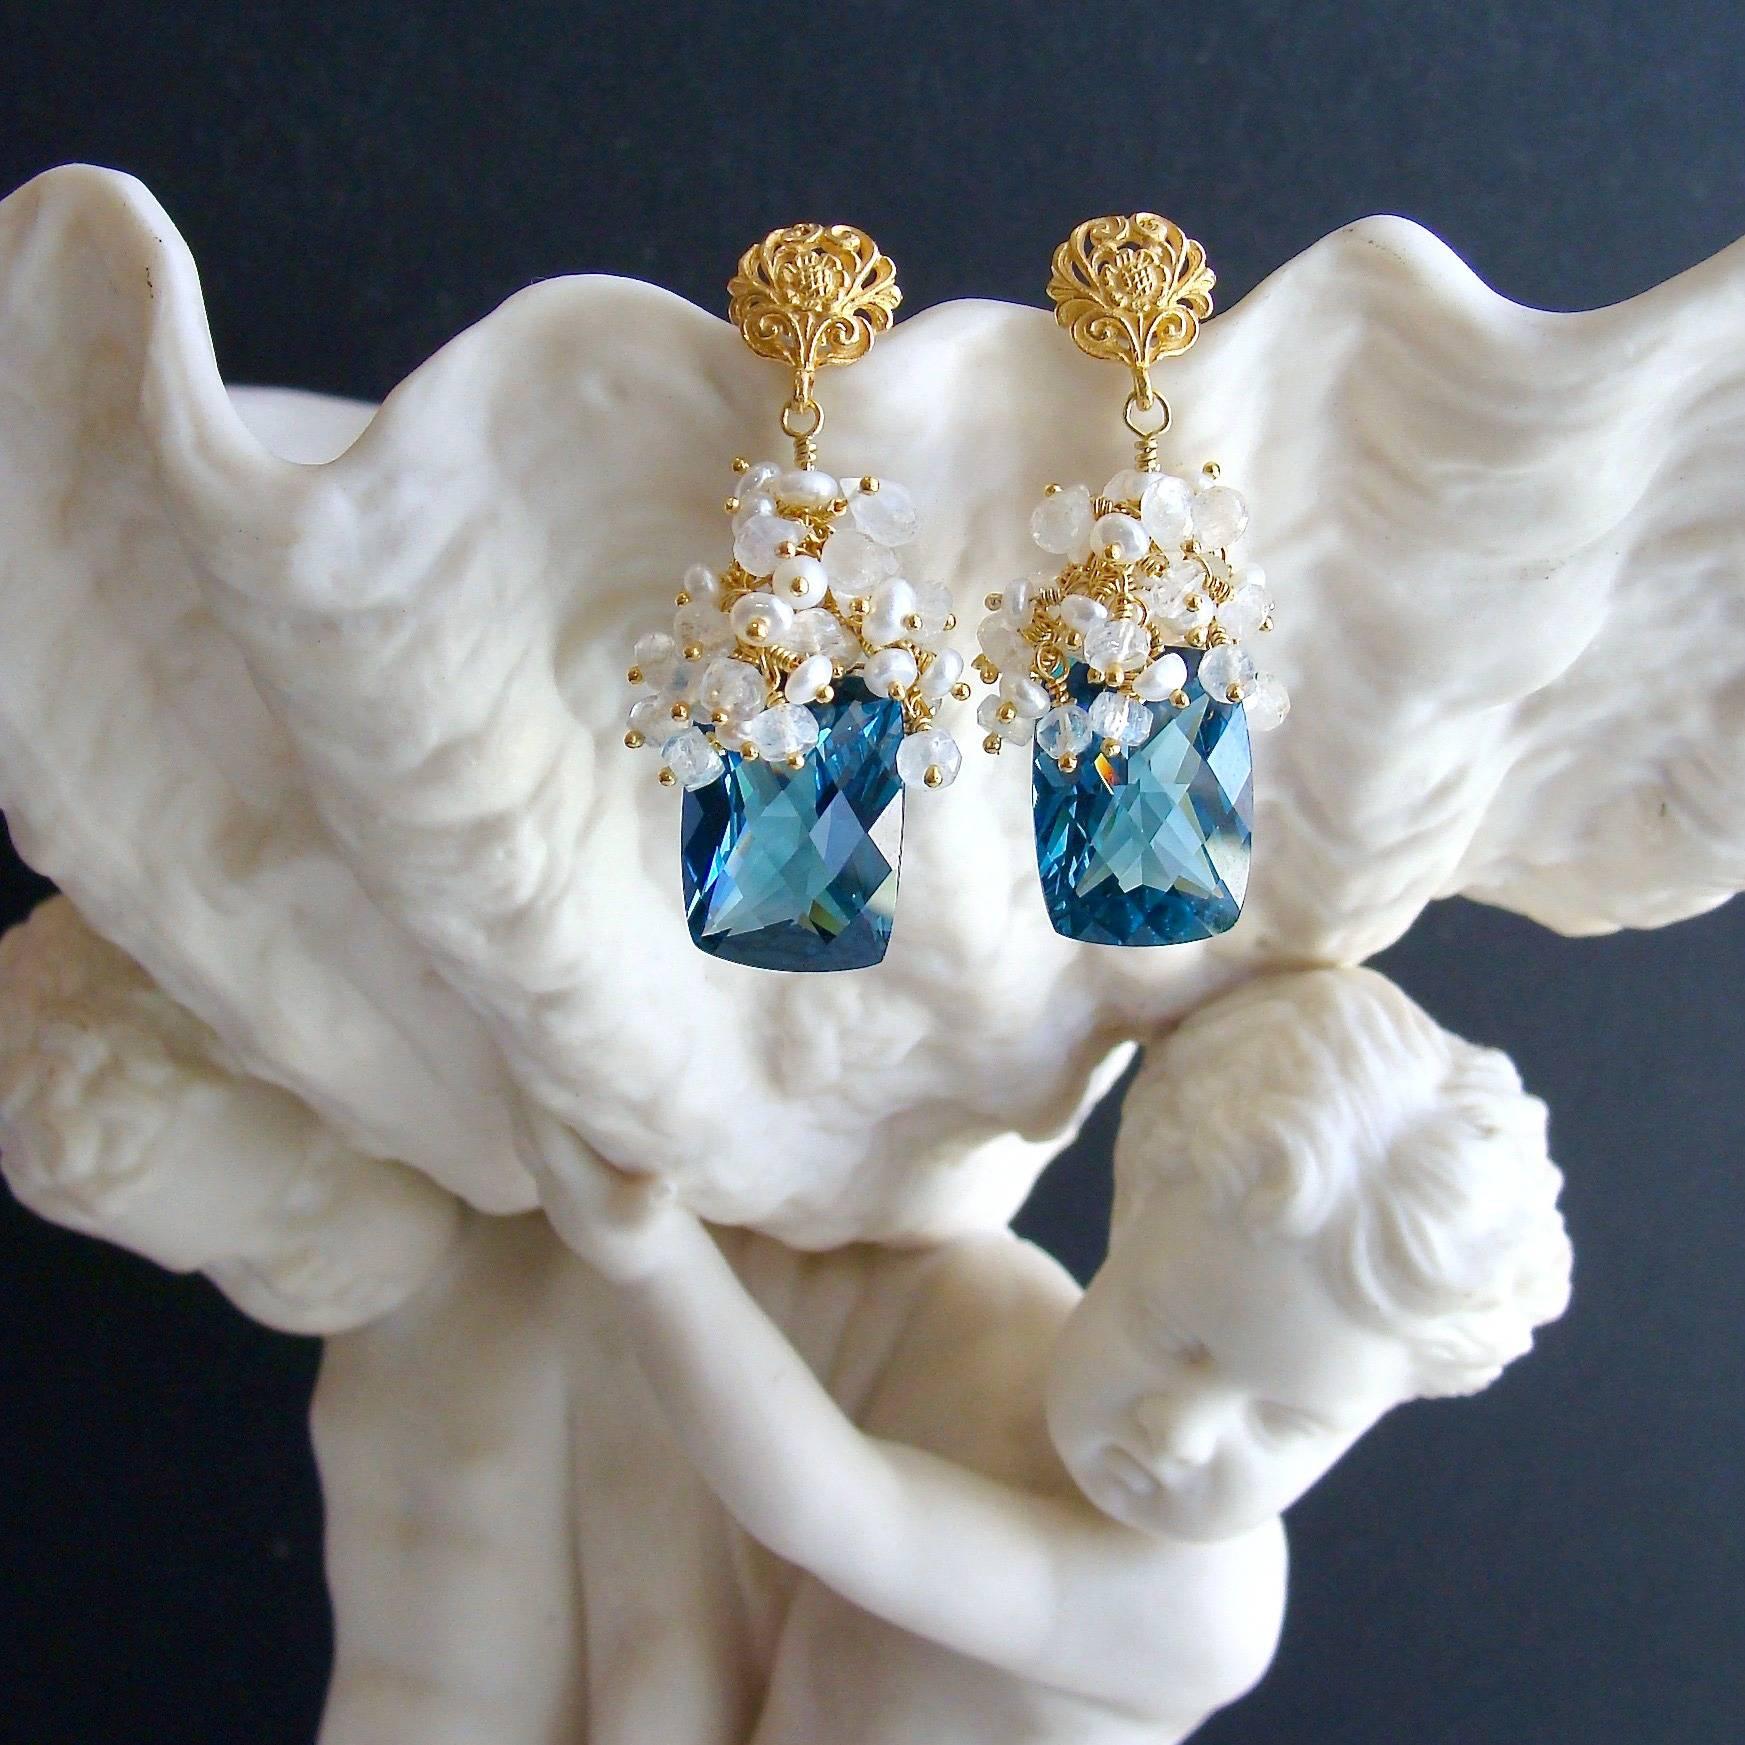 Dione VII Earrings.

These stunning earrings were named after one of the Greek Nereides or sea goddesses – Dione (The Divine).  

Reminiscent of the ocean – Luxe harlequin faceted London blue topaz baguettes are capped with a foamy froth of dainty